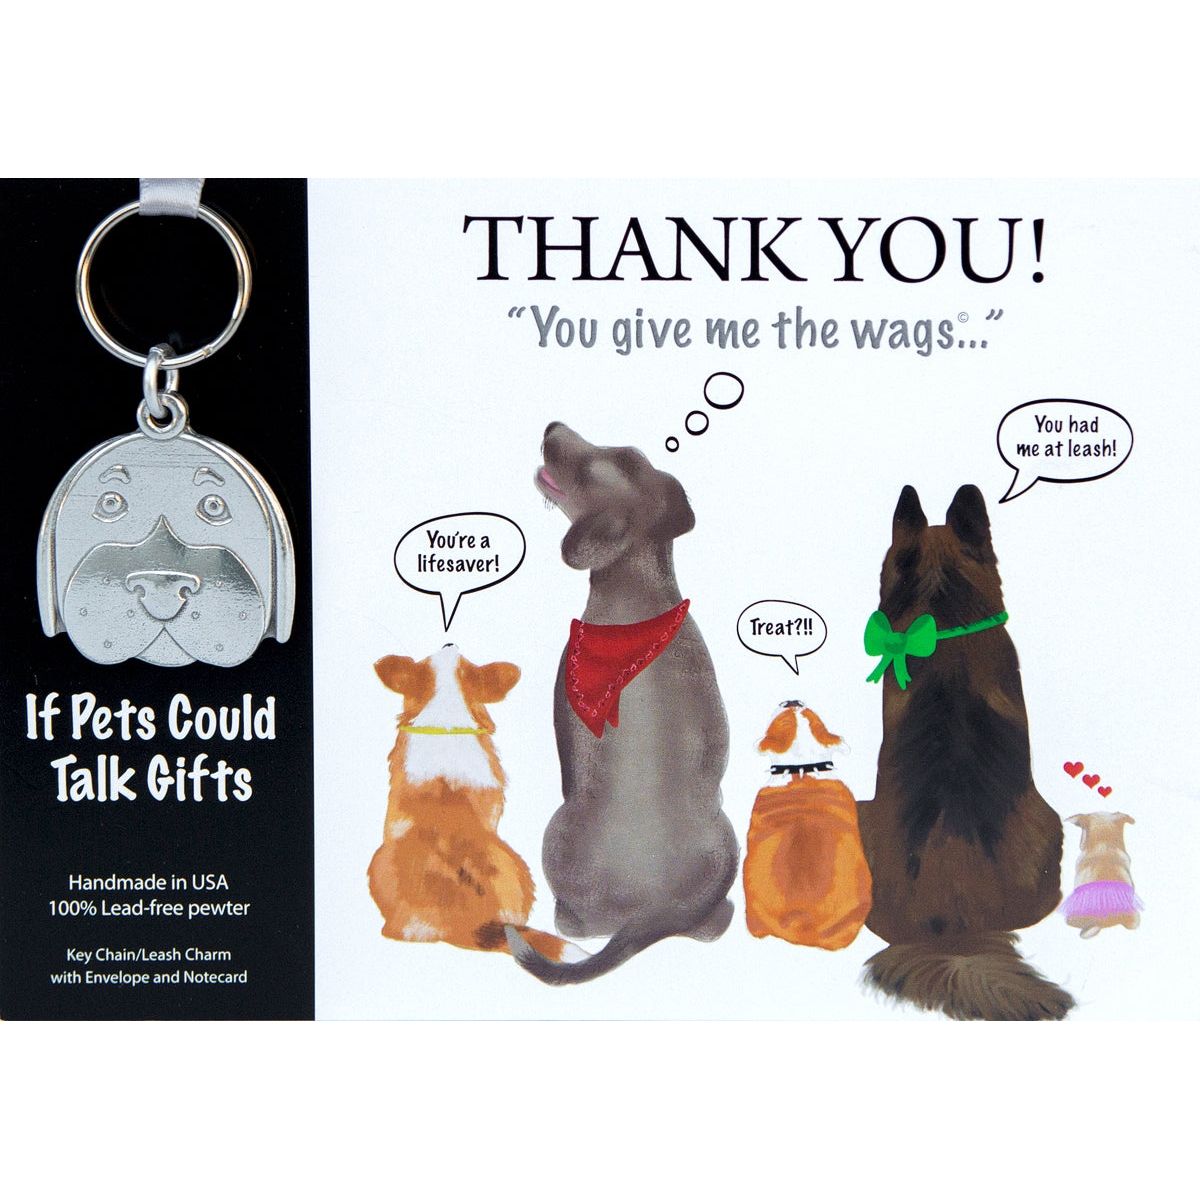 Pewter keychain in shape of a dog&#39;s face packaged with a &quot;Thank You&quot; card.